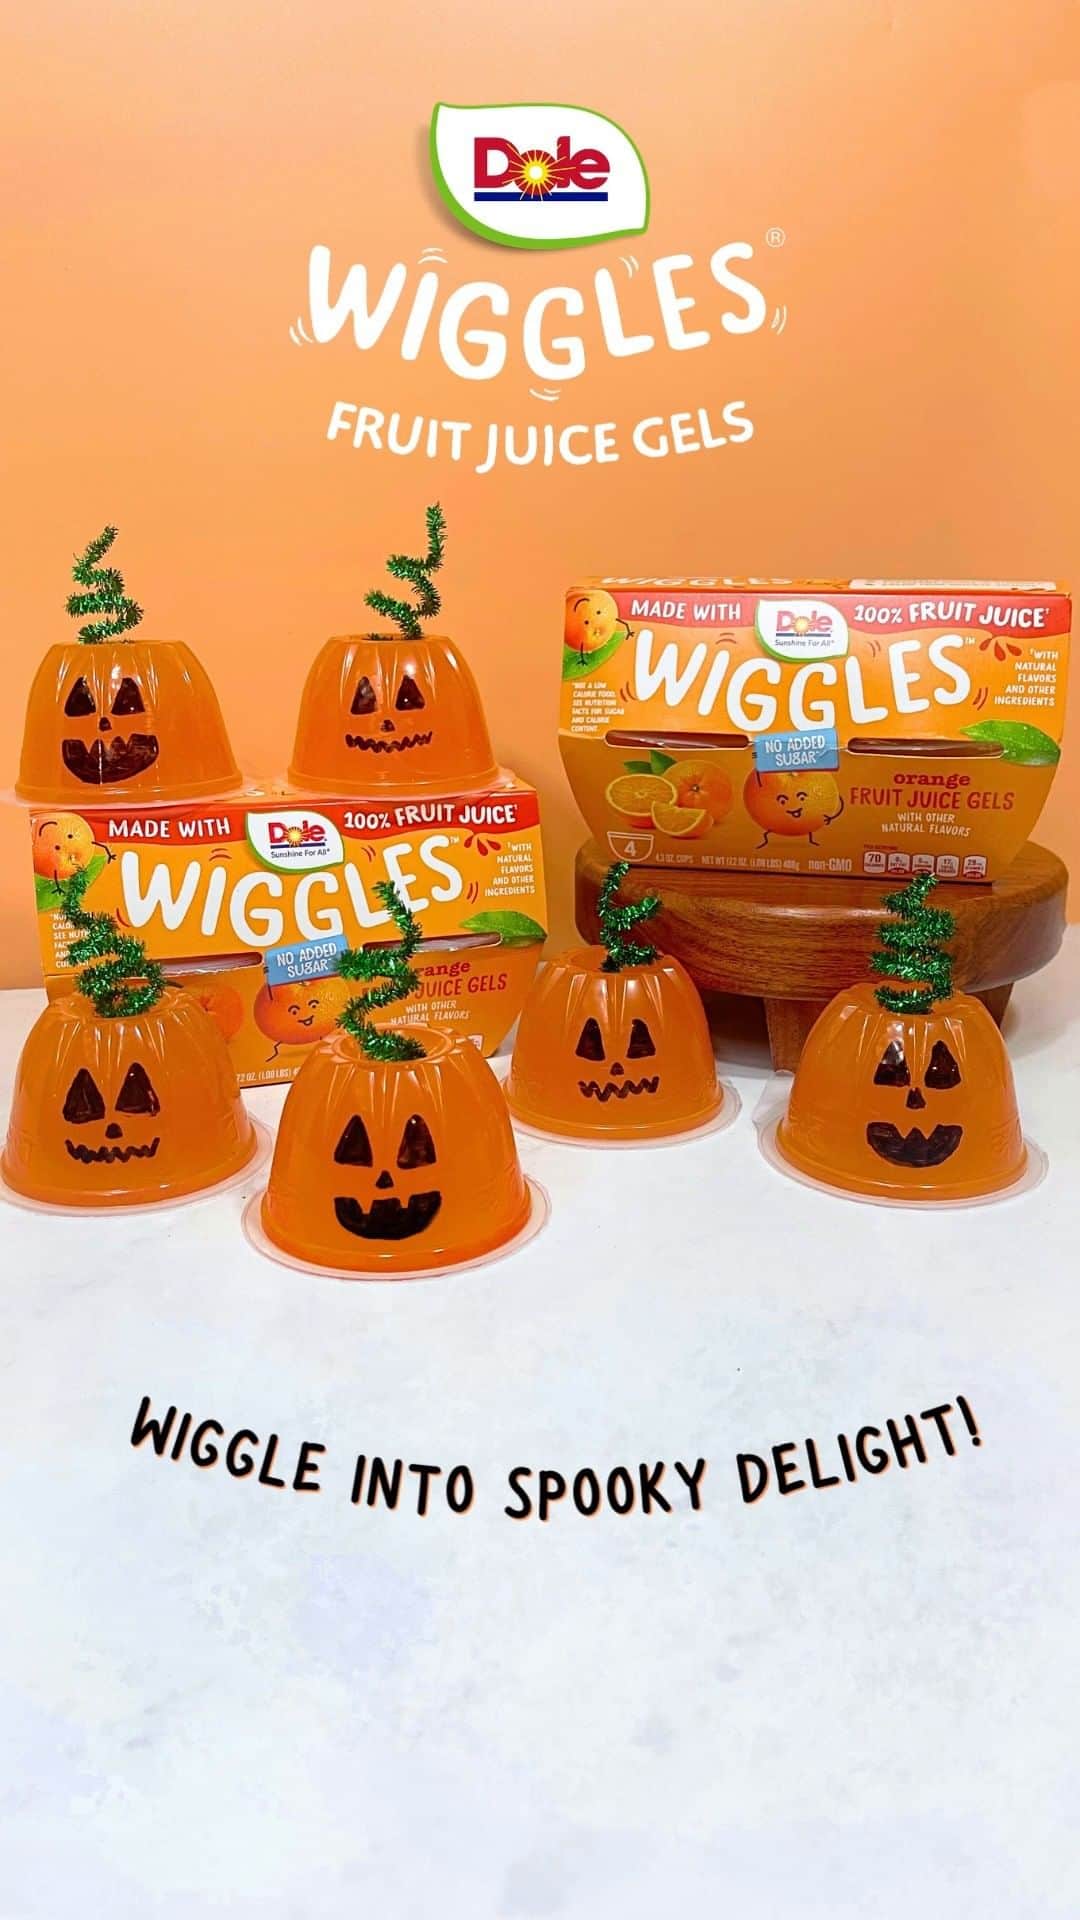 Dole Packaged Foods（ドール）のインスタグラム：「👻 Trick-or-Treat! Dole Wiggles® makes Halloween more fun! Dole -IY your very own Halloween Jack-O-Lanterns! 🎃 A great Halloween craft with the kids that ends with a delicious treat! Follow the steps below! 👇  What You Need: 🔸 Green Pipe Cleaners 🔸 Black Permanent Marker 🔸 Hot Glue Gun 🔸 Dole Wiggles® Orange Flavor  Instructions: 🔸 Flip your Dole Wiggles® Orange Flavor bowl over 🔸 Using your permanent black marker draw a Jack-O-Lantern face on your bowl 🔸 Cut your green pipe cleaner in half 🔸 Wrap up green pipe cleaner around your finger to create a swirled shape 🔸 Hot glue your swirled pipe cleaner to the bottom of your Dole Wiggles® bowl  #DIY #DoleWiggles #KidsDessert #Dole #HalloweenTreat #Trickortreat #Halloween」